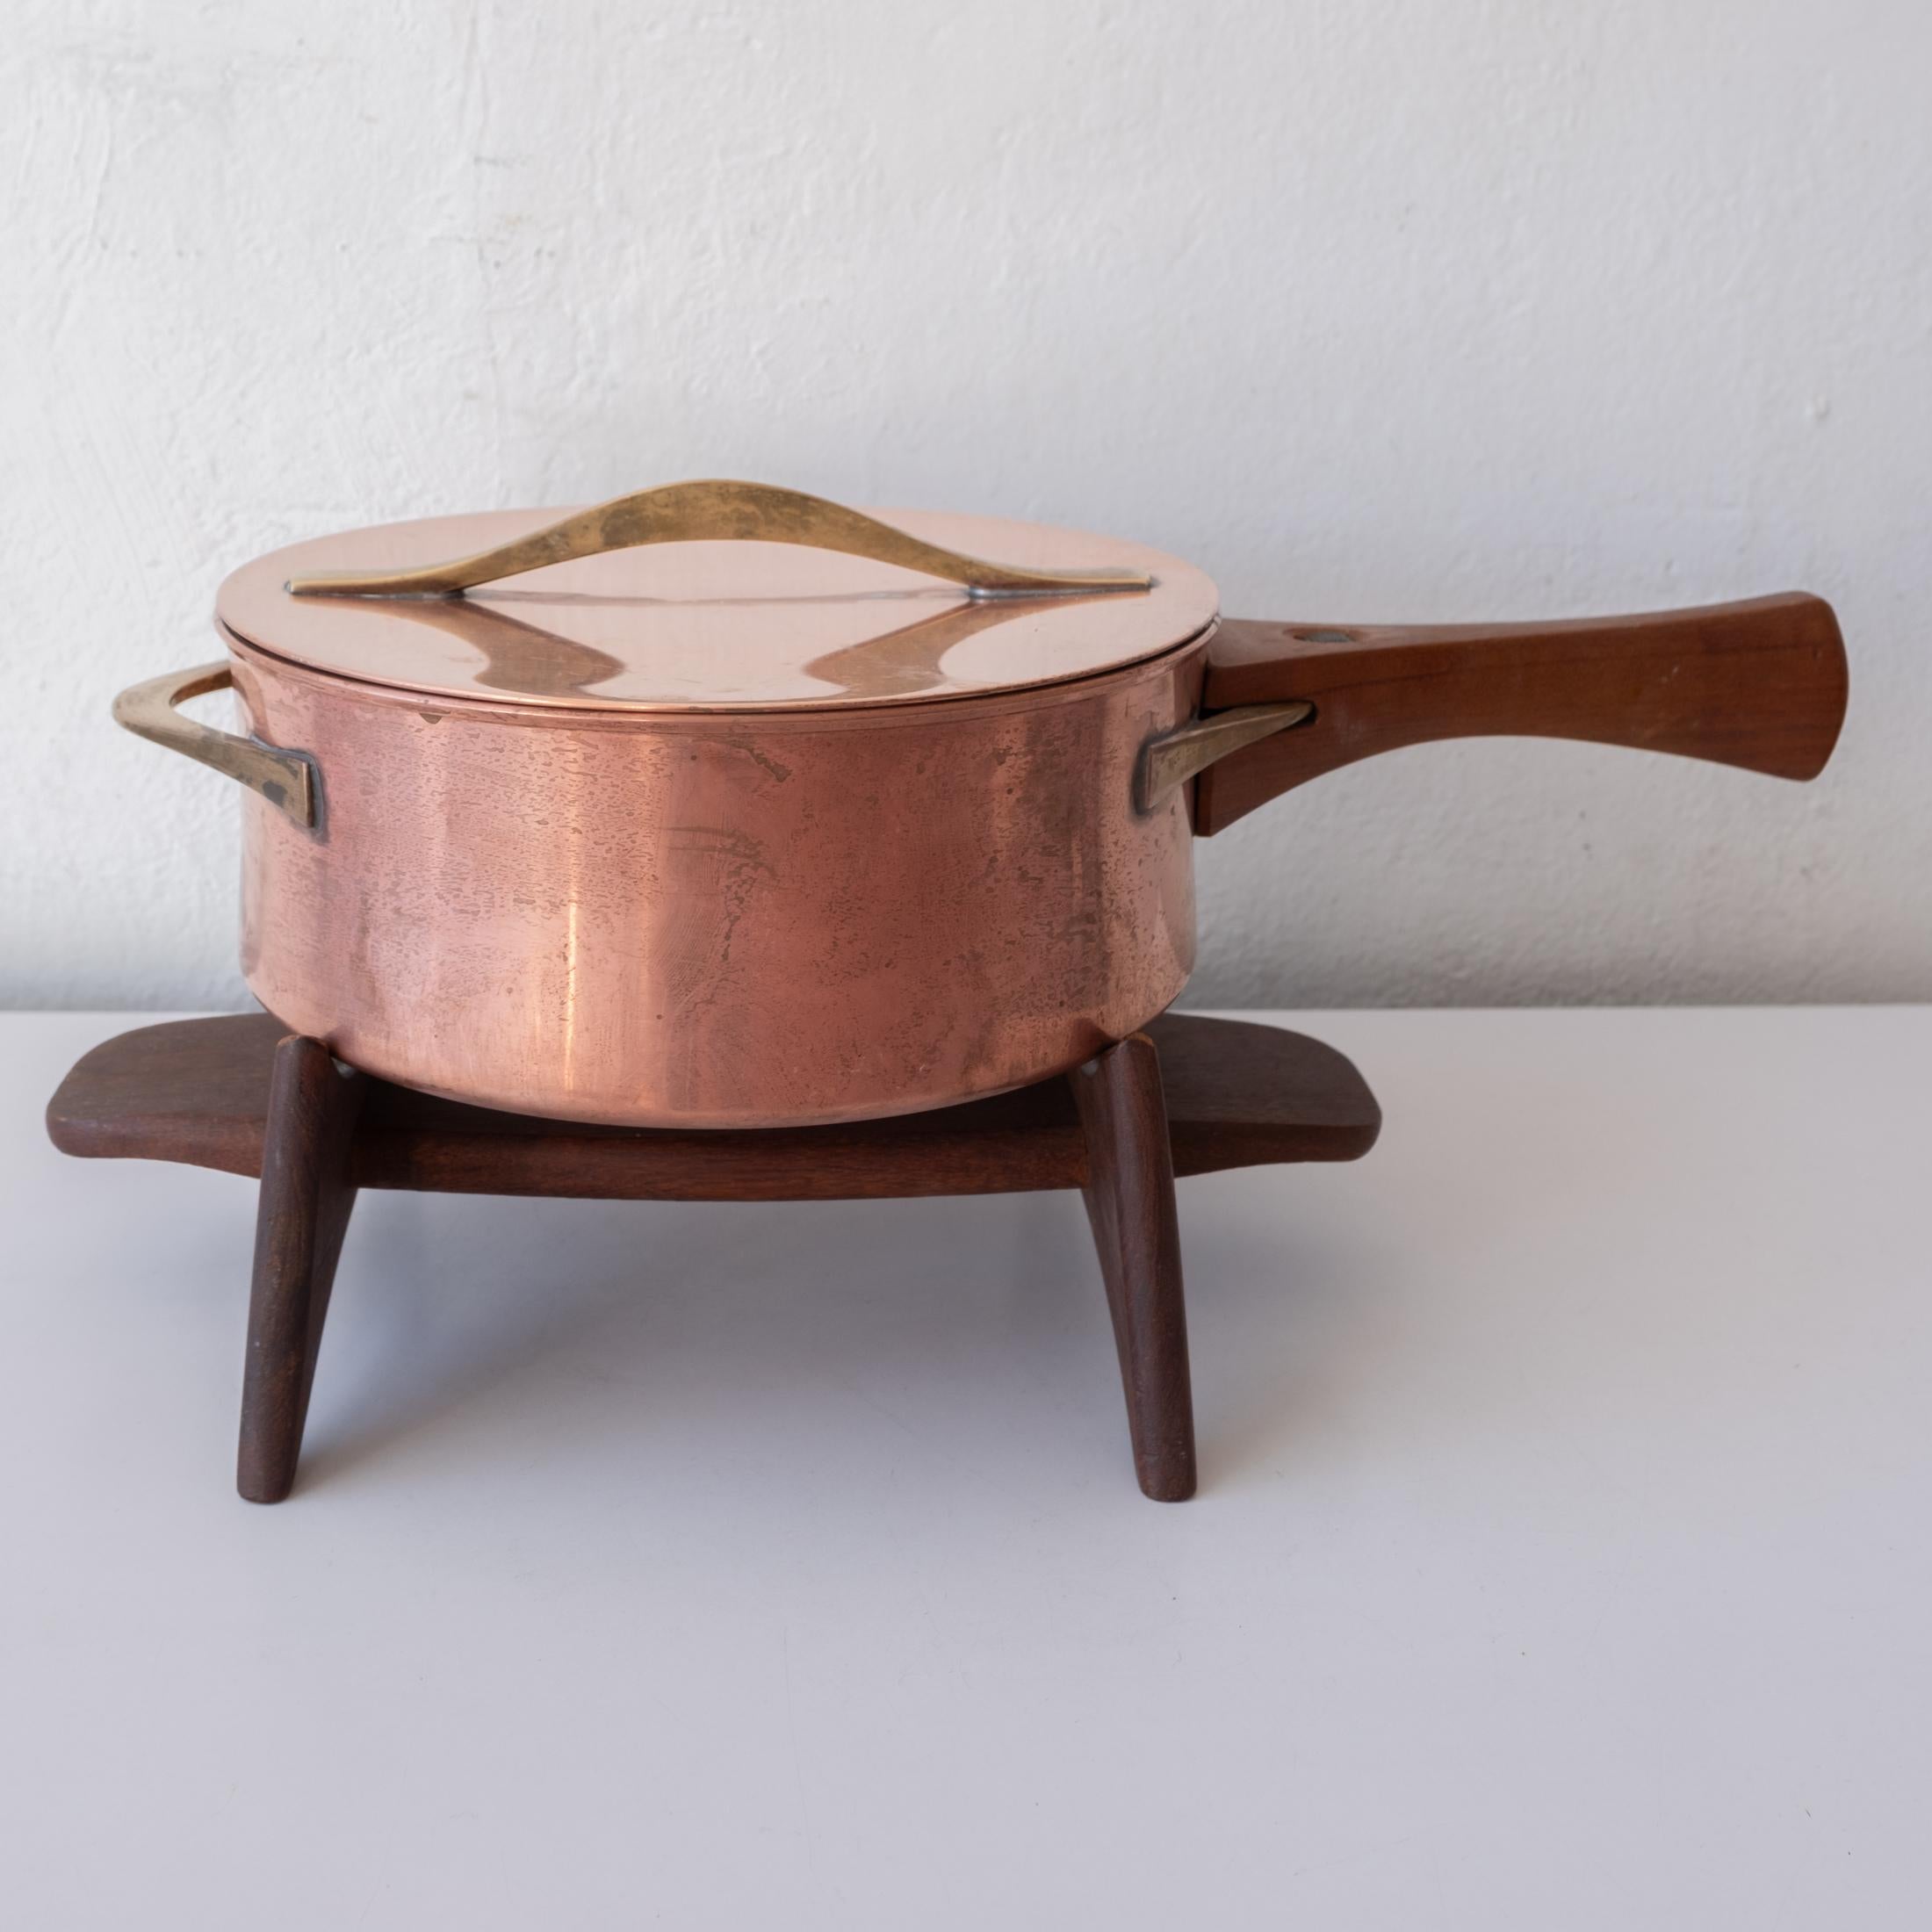 A rare copper cooking pot by Jens Quistgaard for Dansk. Complete with rare ceramic inner pot, removable teak handle and teak stand. Signed on the ceramic and stand. Made in Denmark, 1950s. 
